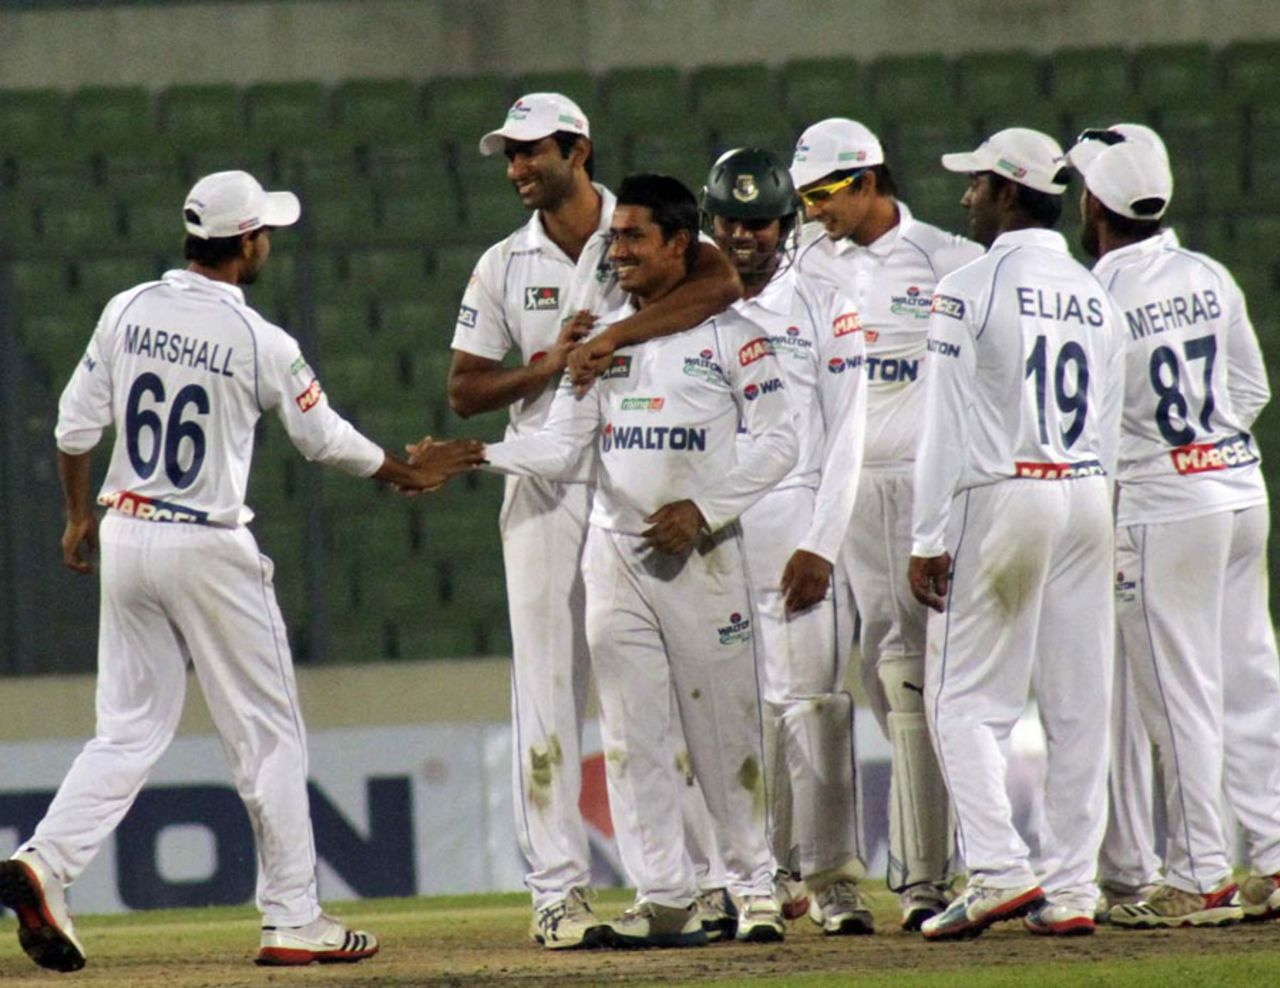 North Zone's Mohammad Ashraful celebrates a wicket, Central Zone v North Zone, BCL final, Mirpur, 2nd day, February 23, 2013